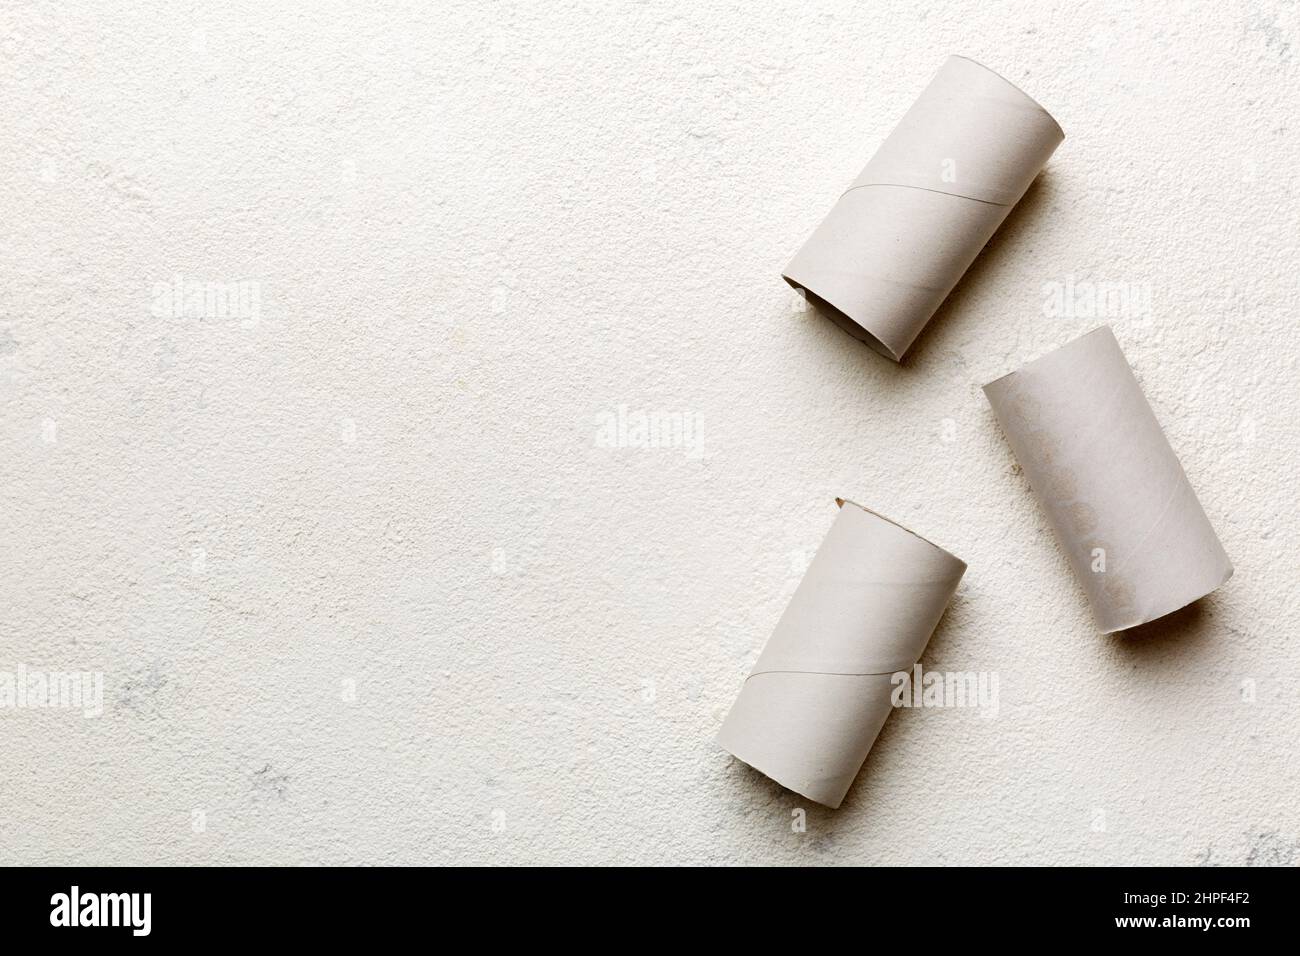 Flat lay composition with empty toilet paper rolls and space for text